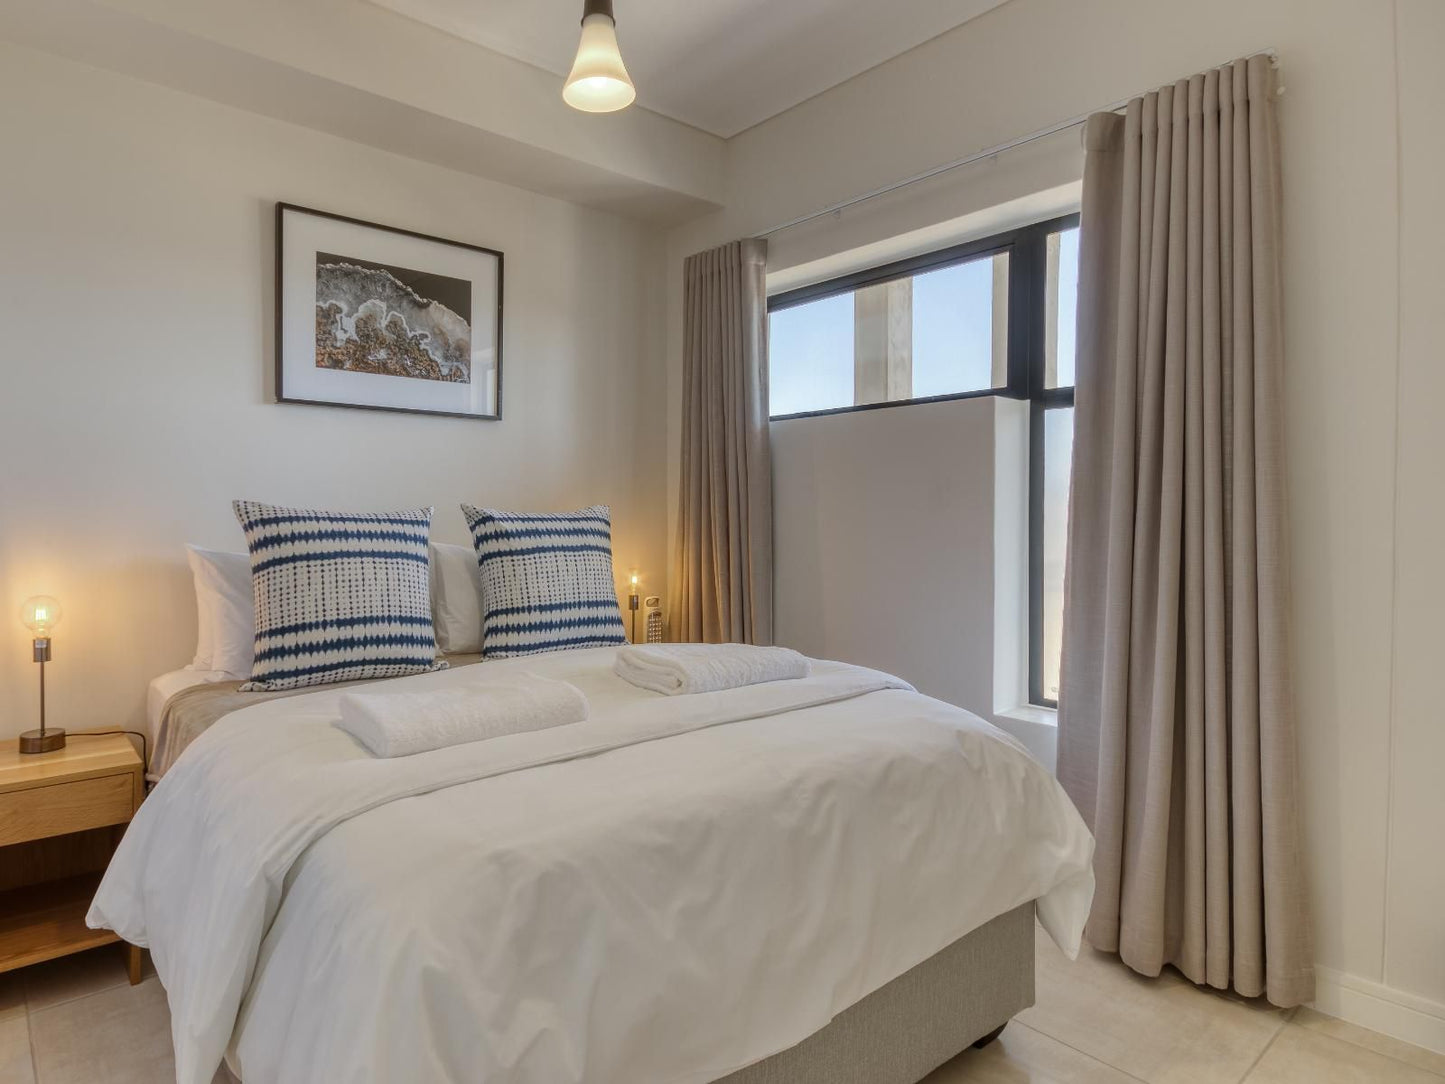 Uniquestay Paardevlei Square 2 Bedroom Apartment Firgrove Rural Somerset West Western Cape South Africa Unsaturated, Bedroom